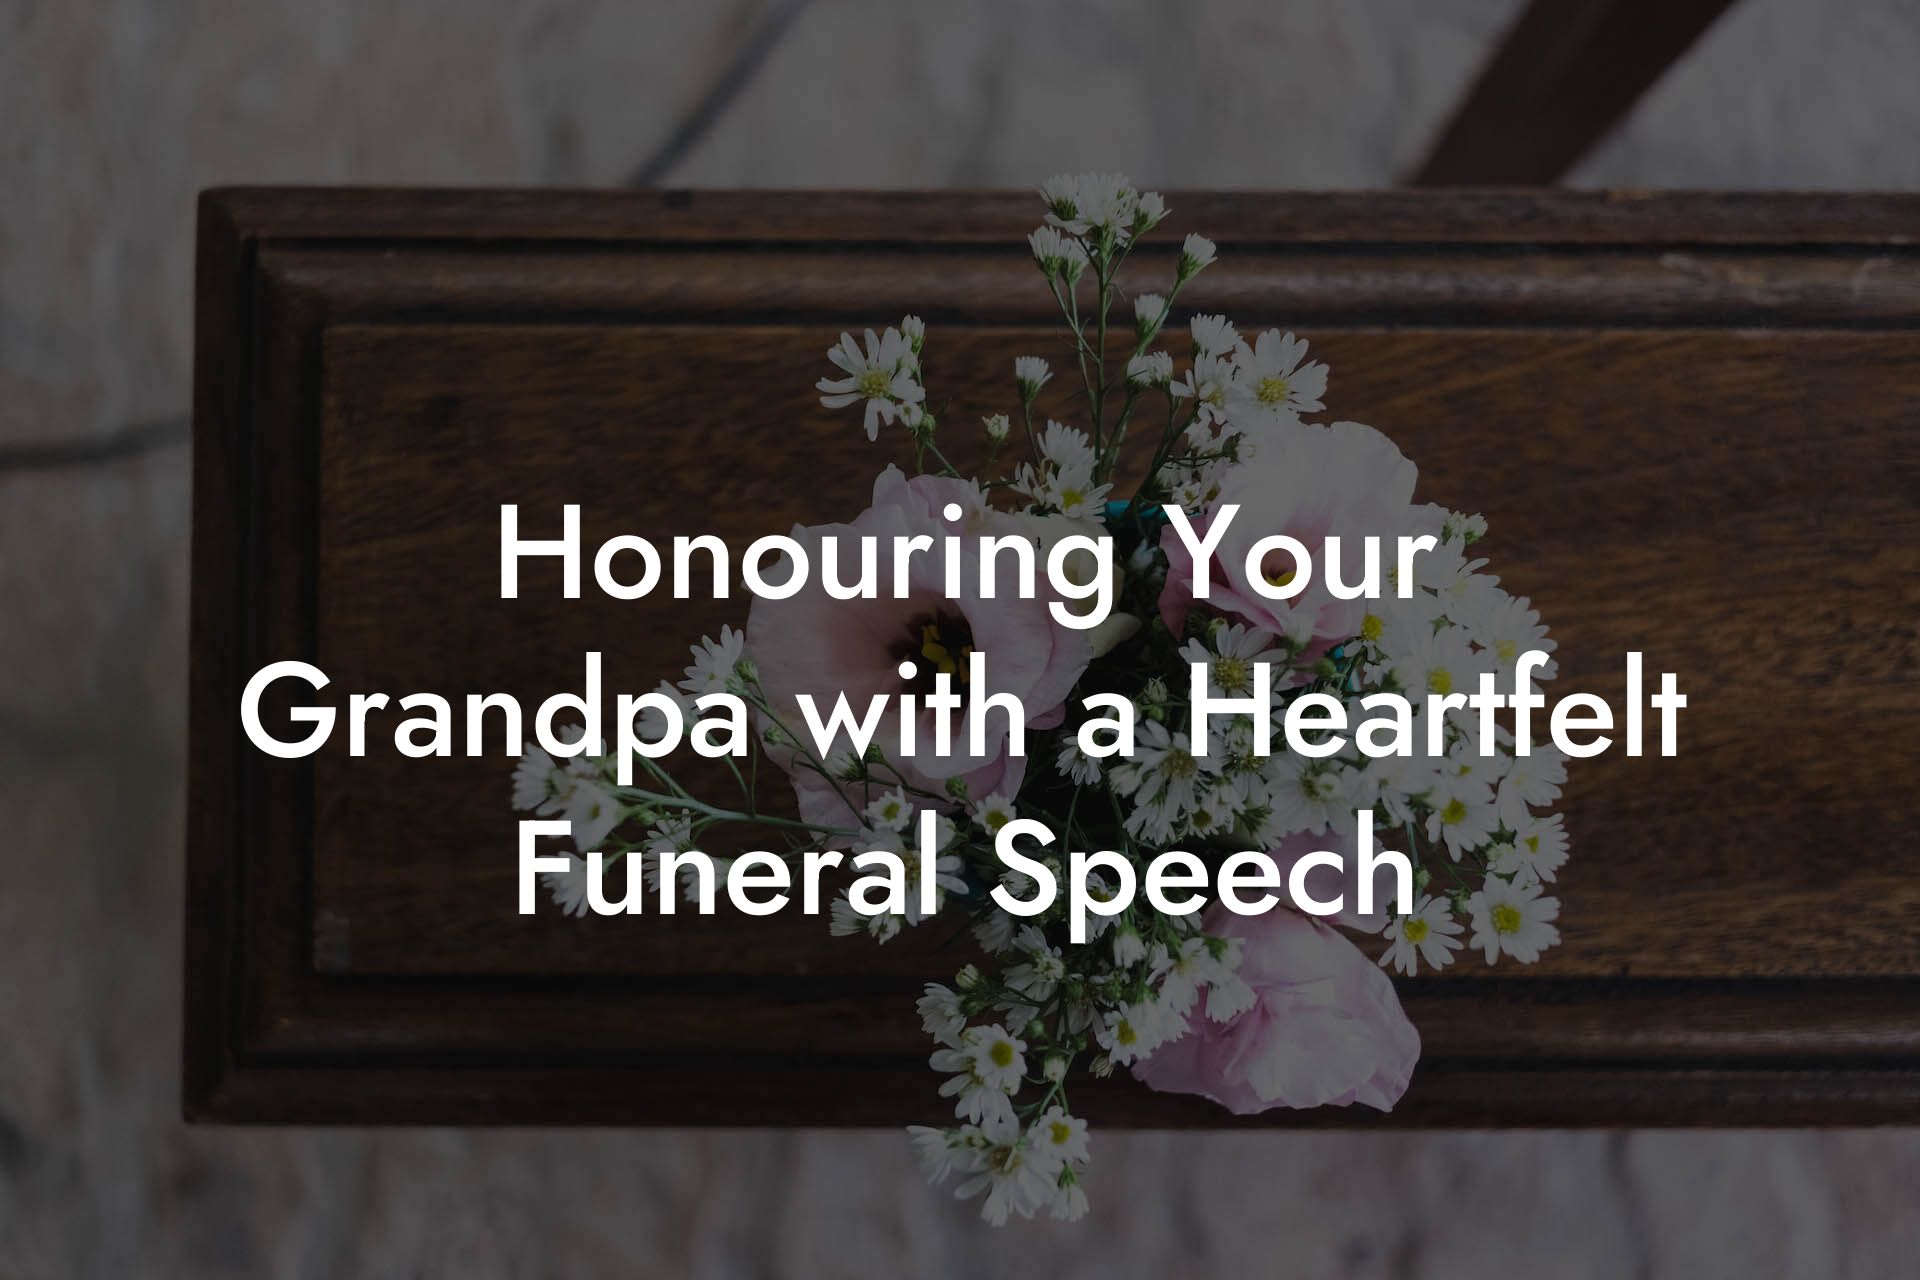 Honouring Your Grandpa with a Heartfelt Funeral Speech